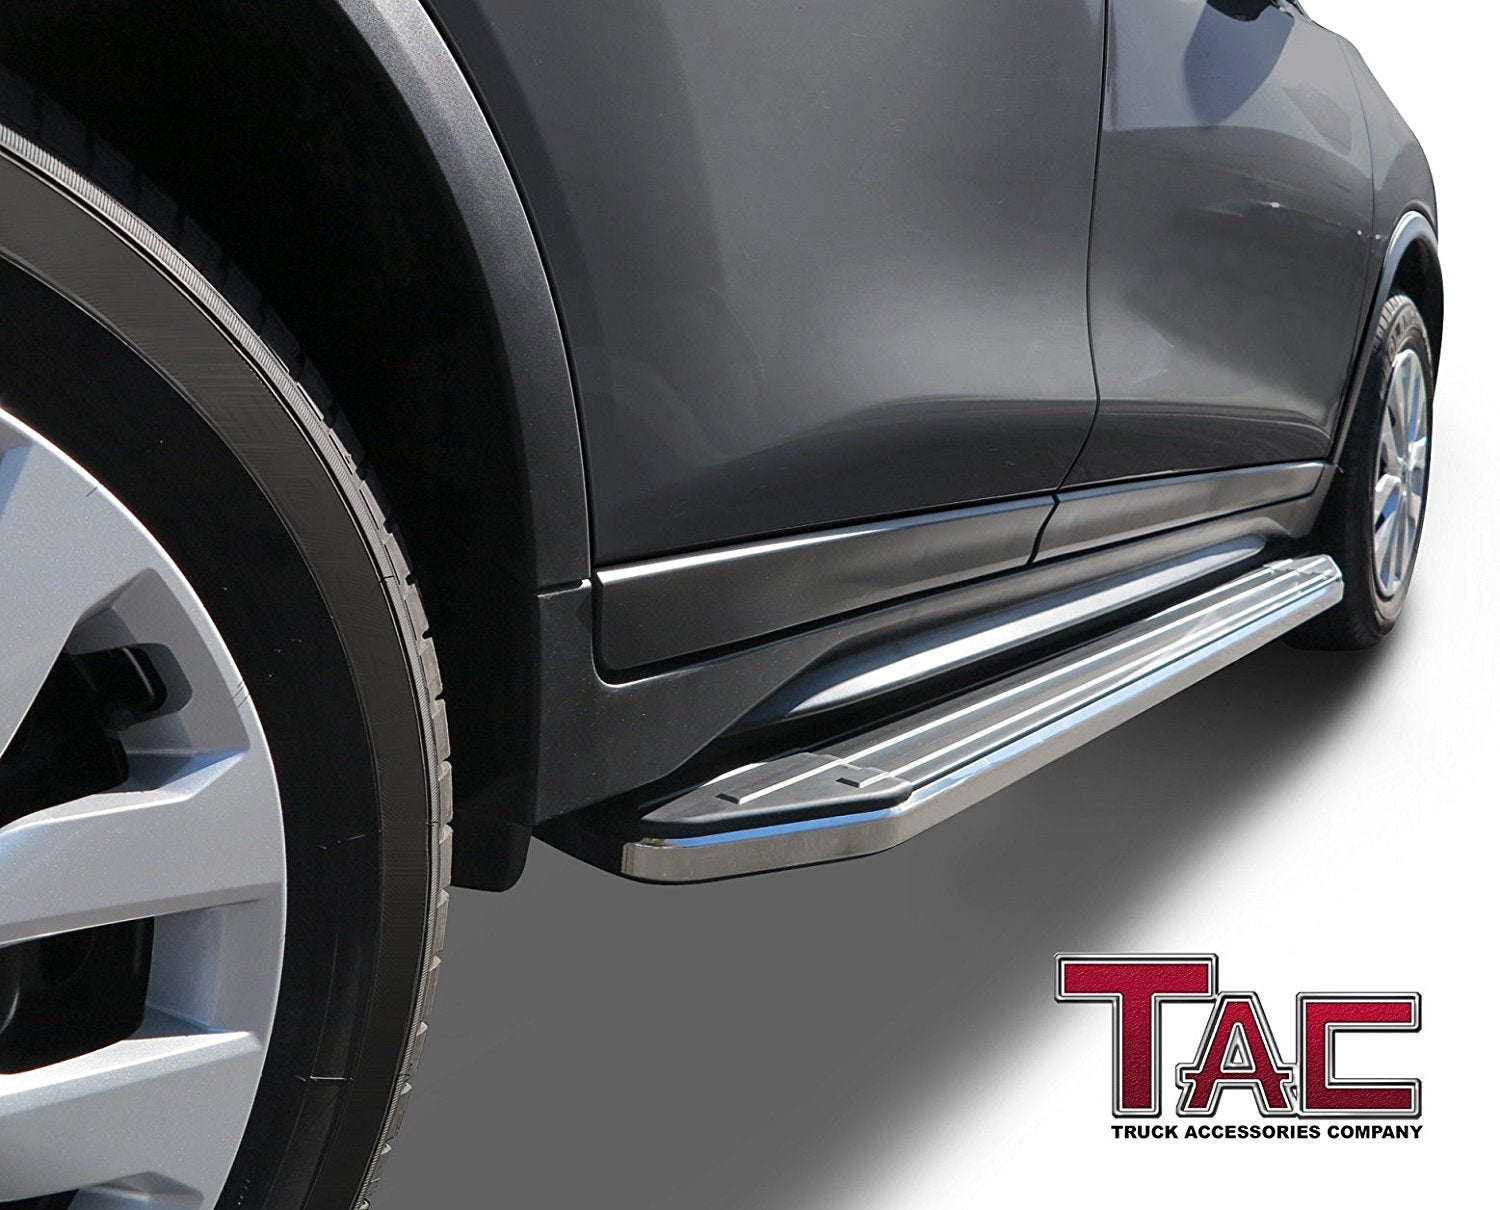 TAC ViewPoint Running Boards Fit 2007-2017 Chevy Traverse (Excl. Denali) / 2007-2016 GMC Acadia (Incl. 2017 Acadia Limited / Excl. Denali) / 2007-2010 Saturn Outlook / 2007-2009 Buick Enclave SUV | Side Steps | Nerf Bars | Side Bars - 0